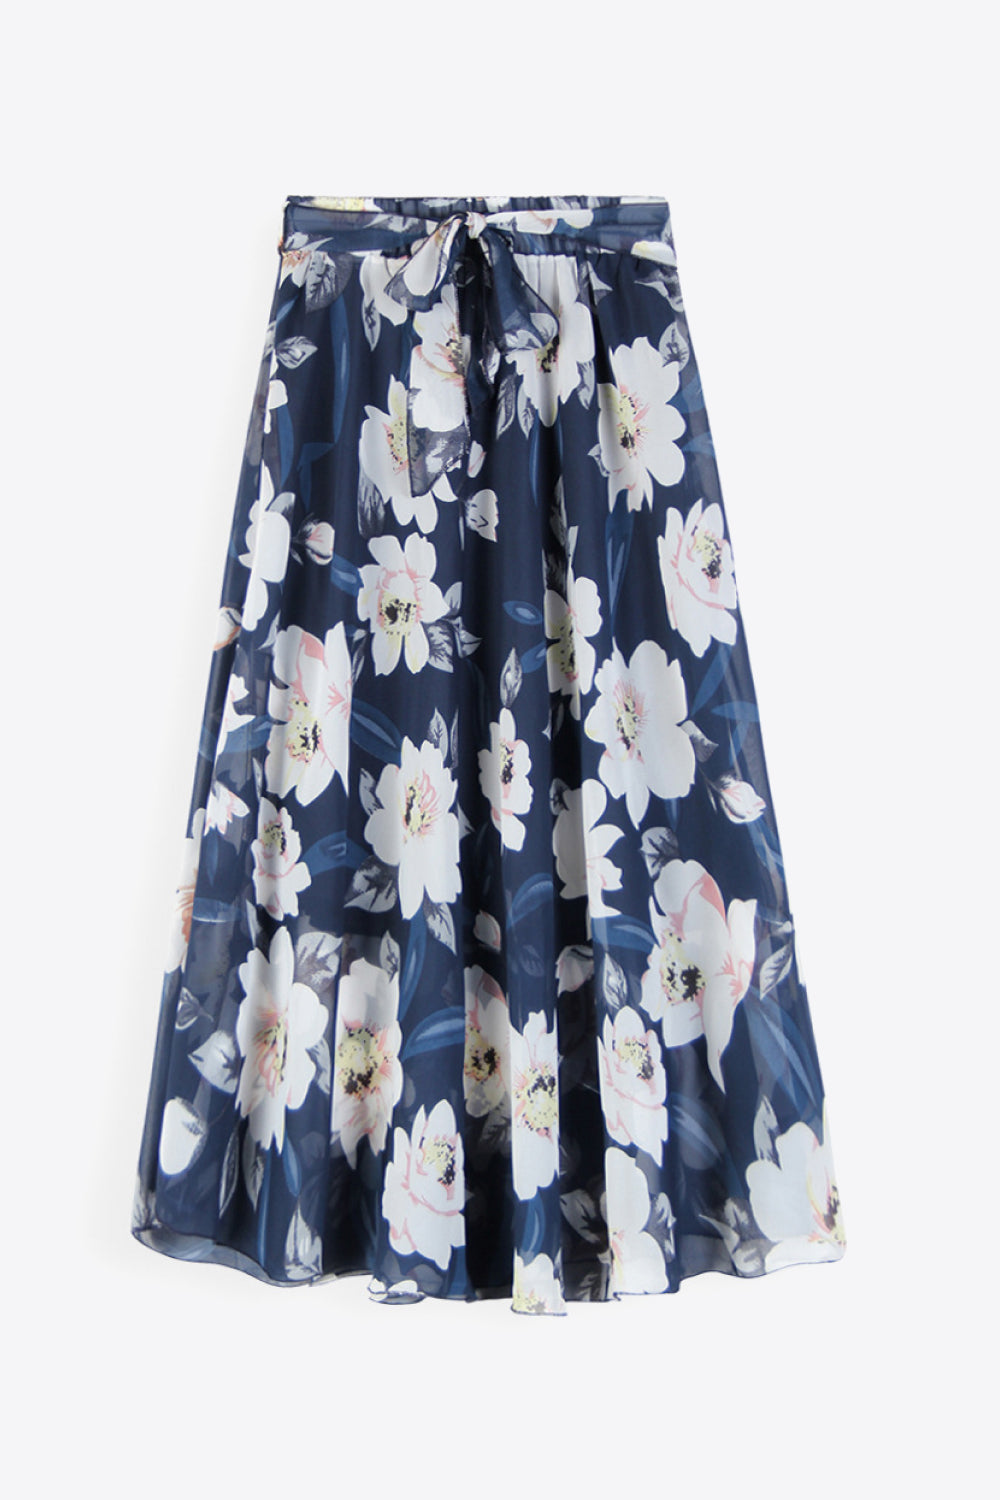 Finding My Way Floral Midi Skirt | 3 colors |